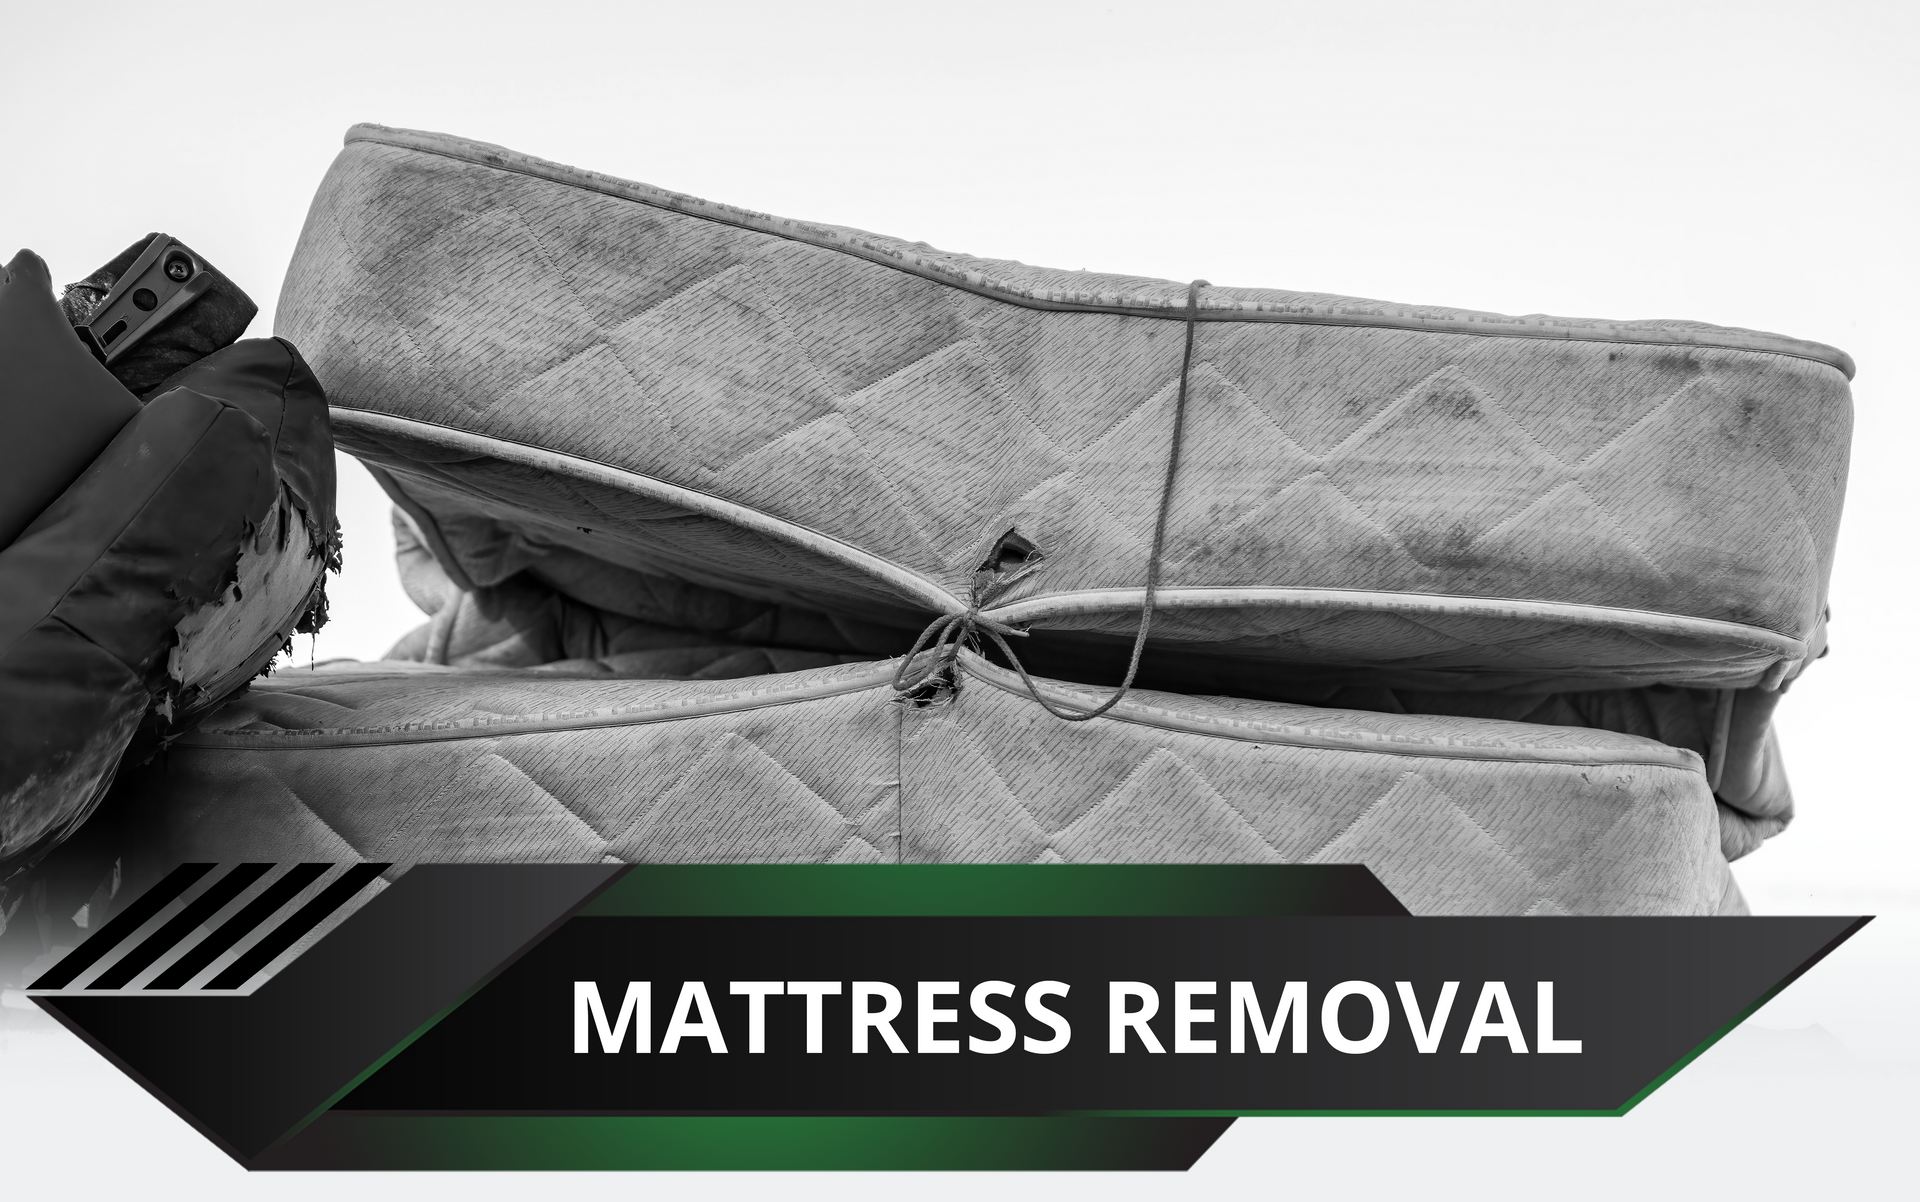 Mattress Removal in Sanger, CA